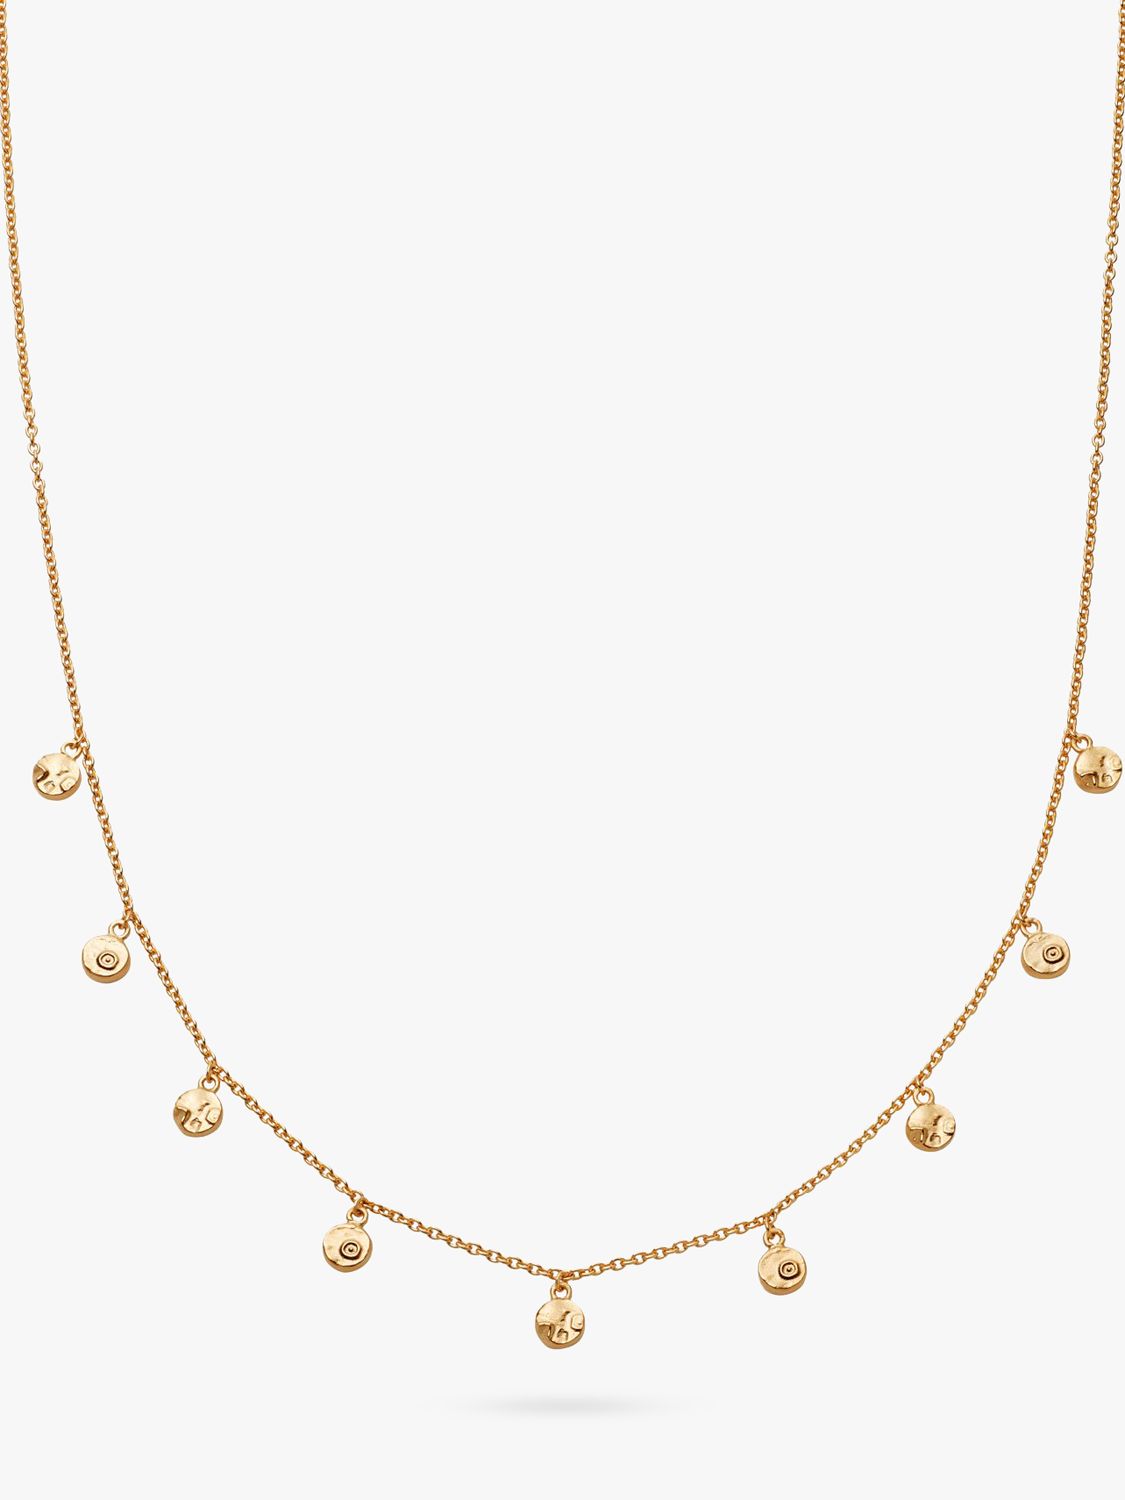 Daisy London Isla Fossil Charm Necklace, Gold at John Lewis & Partners